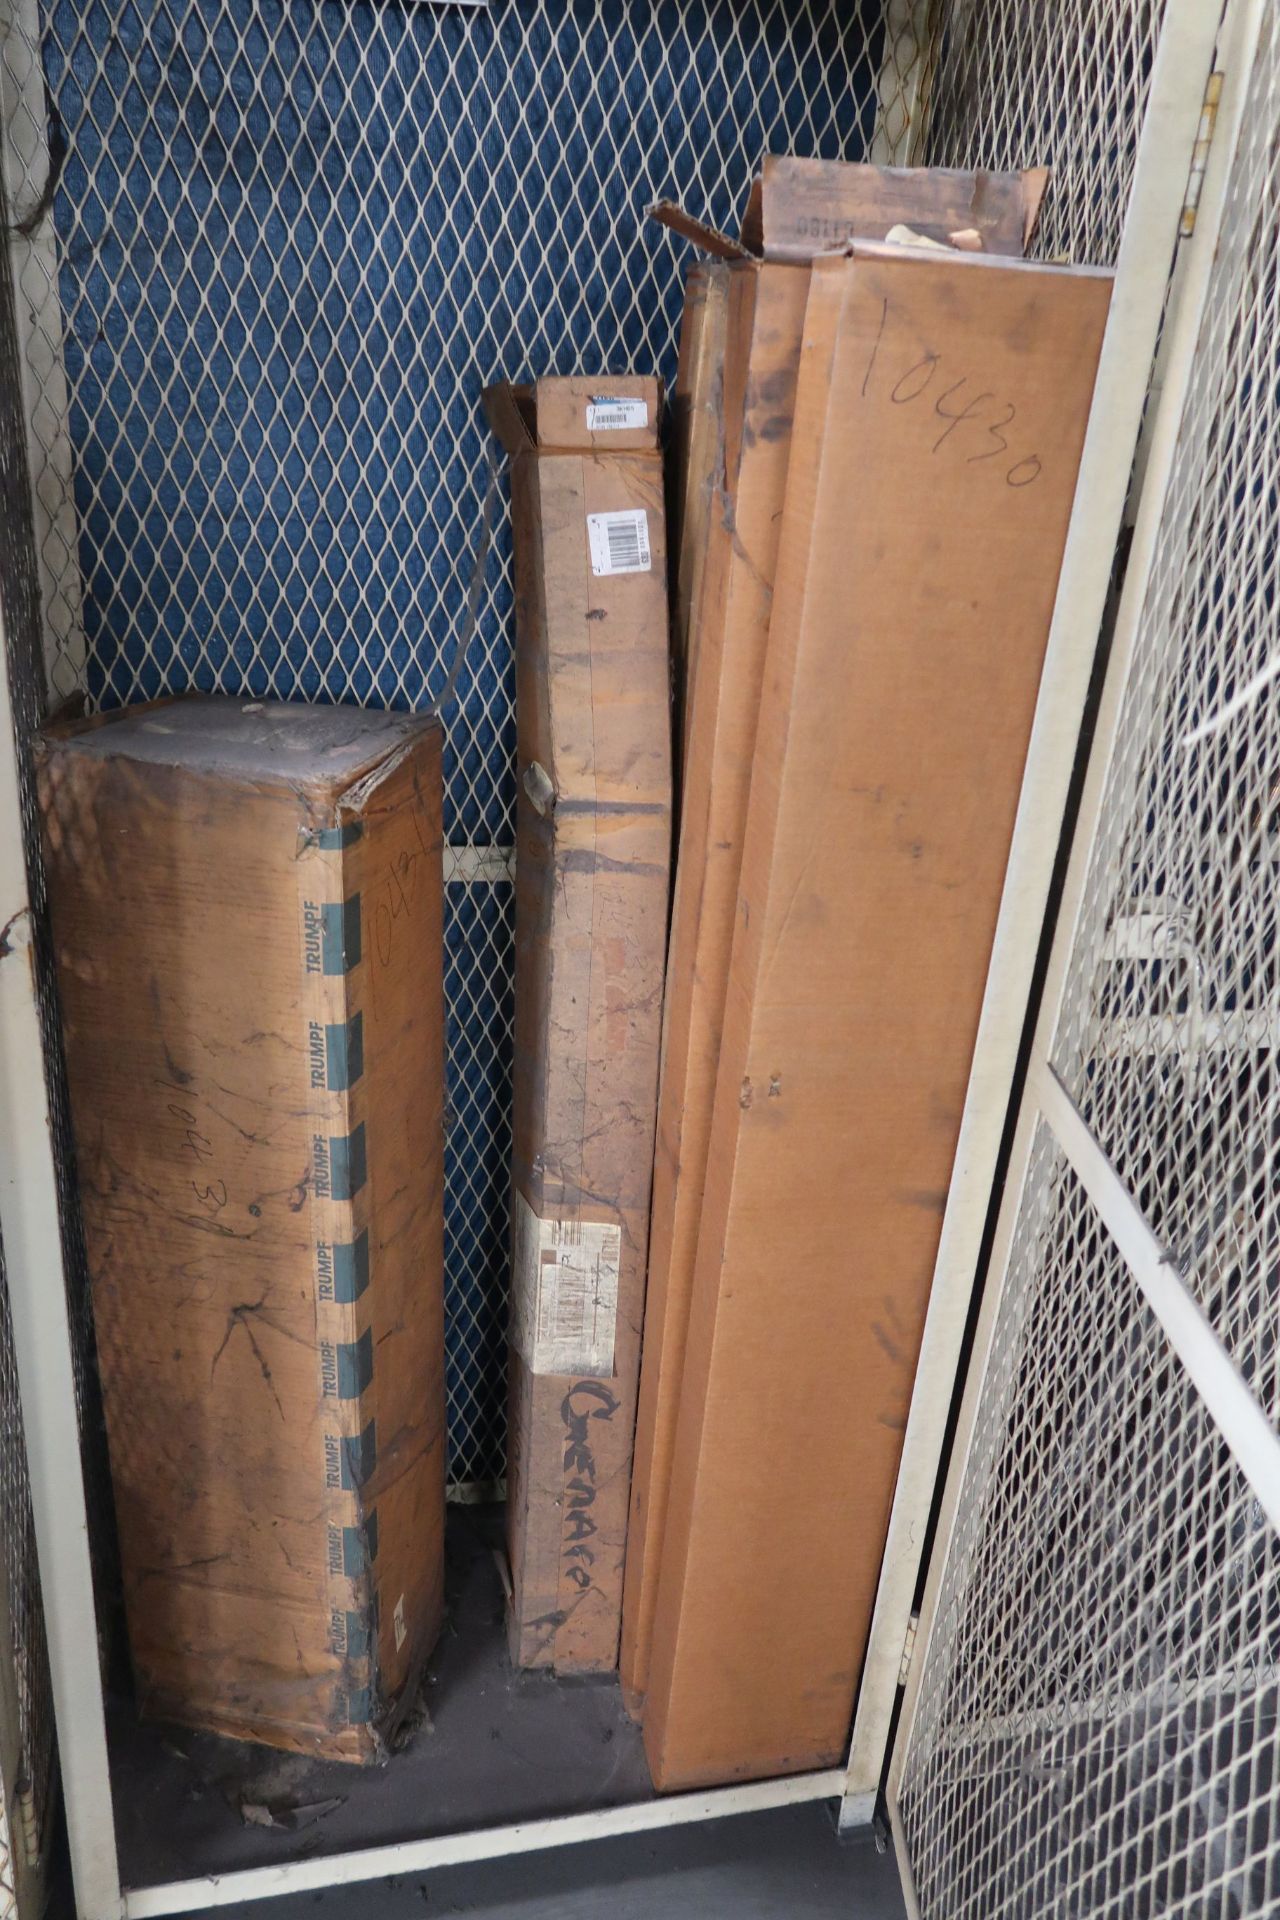 CAGE TYPE RACK WITH CONTENTS - PARTS **LOADING PRICE DUE TO ERRA - $500.00** - Image 3 of 5